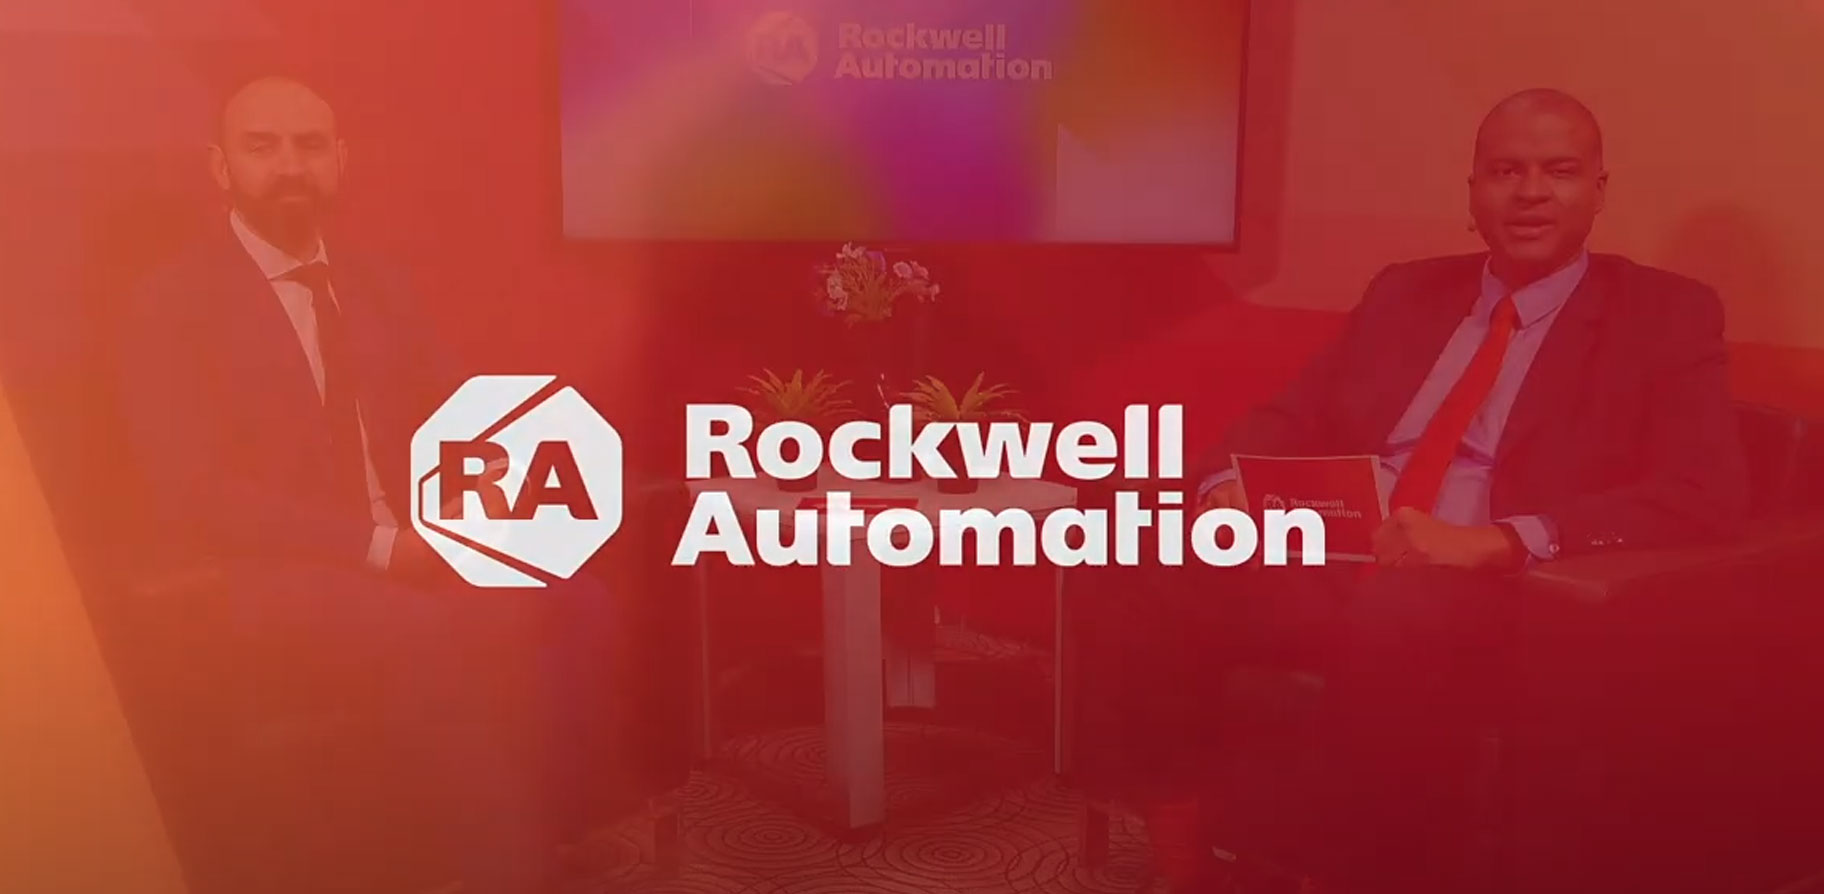 Rockwell Automation interview with Sebastien Grau